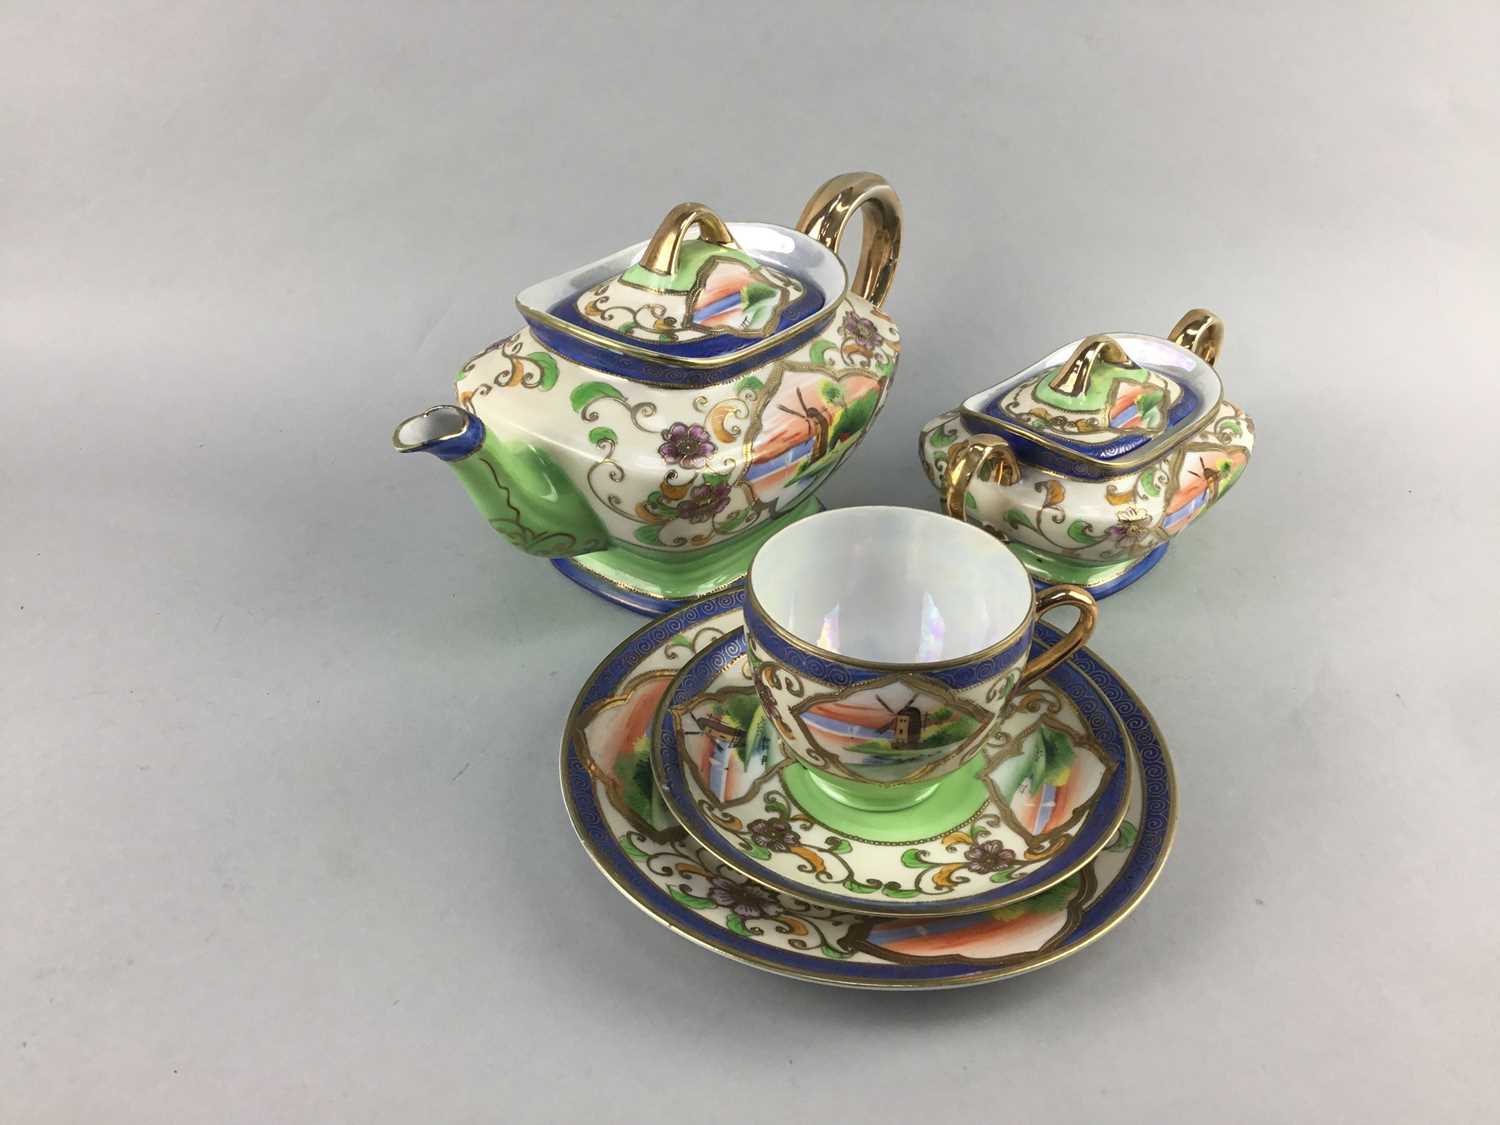 Lot 22 - A JAPANESE EXPORT PART COFFEE SERVICE ALONG WITH A PART TEA SERVICE